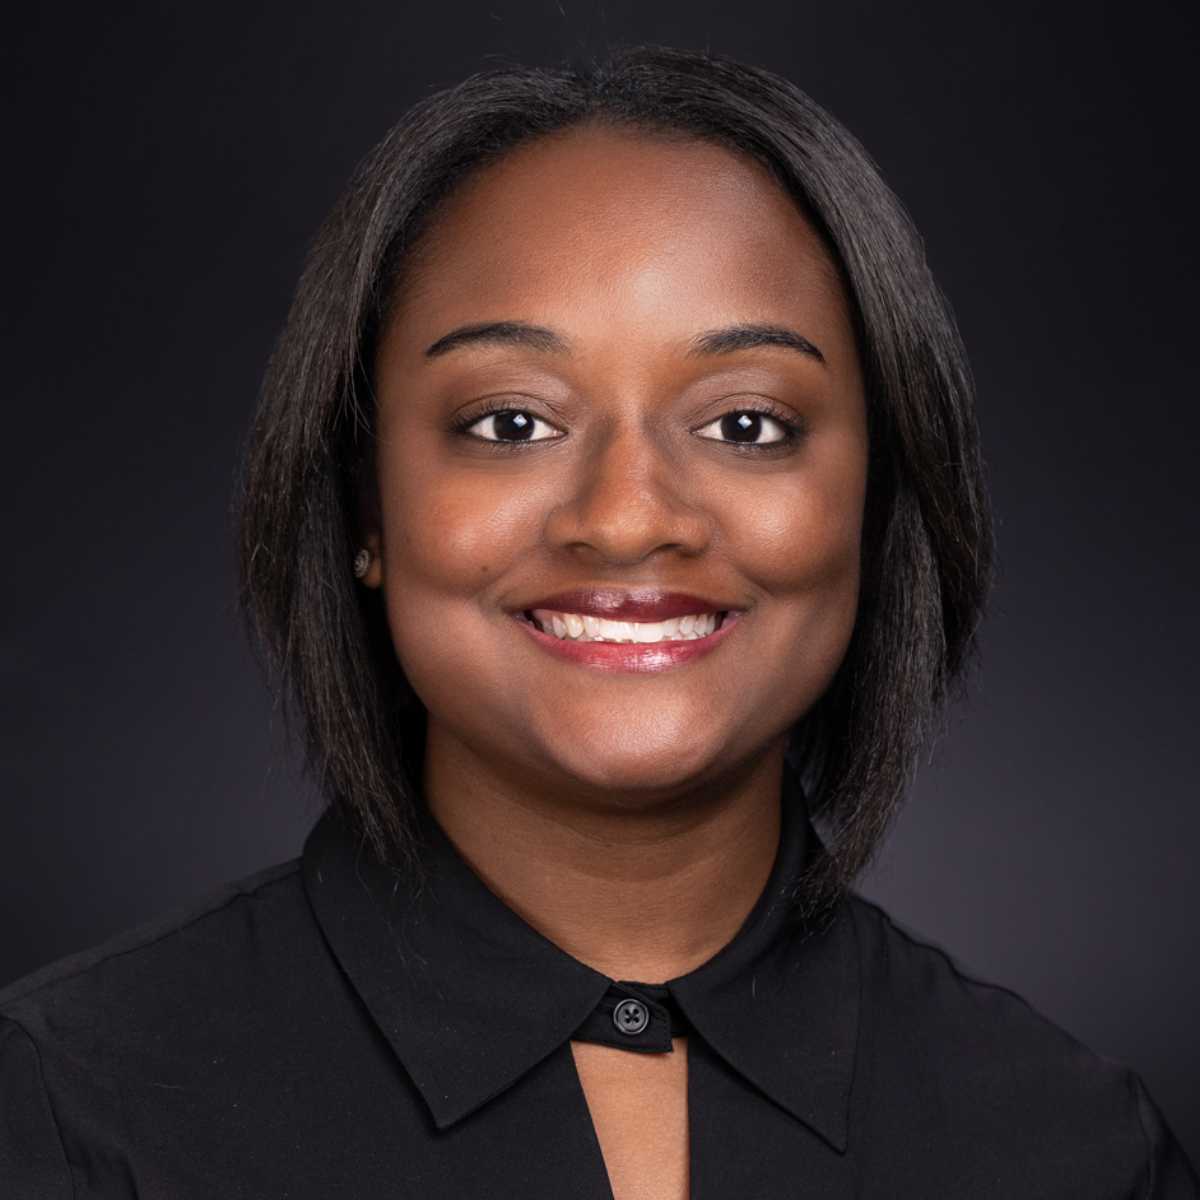 Profile picture of Latanya Linton, DVM, Chief of Staff